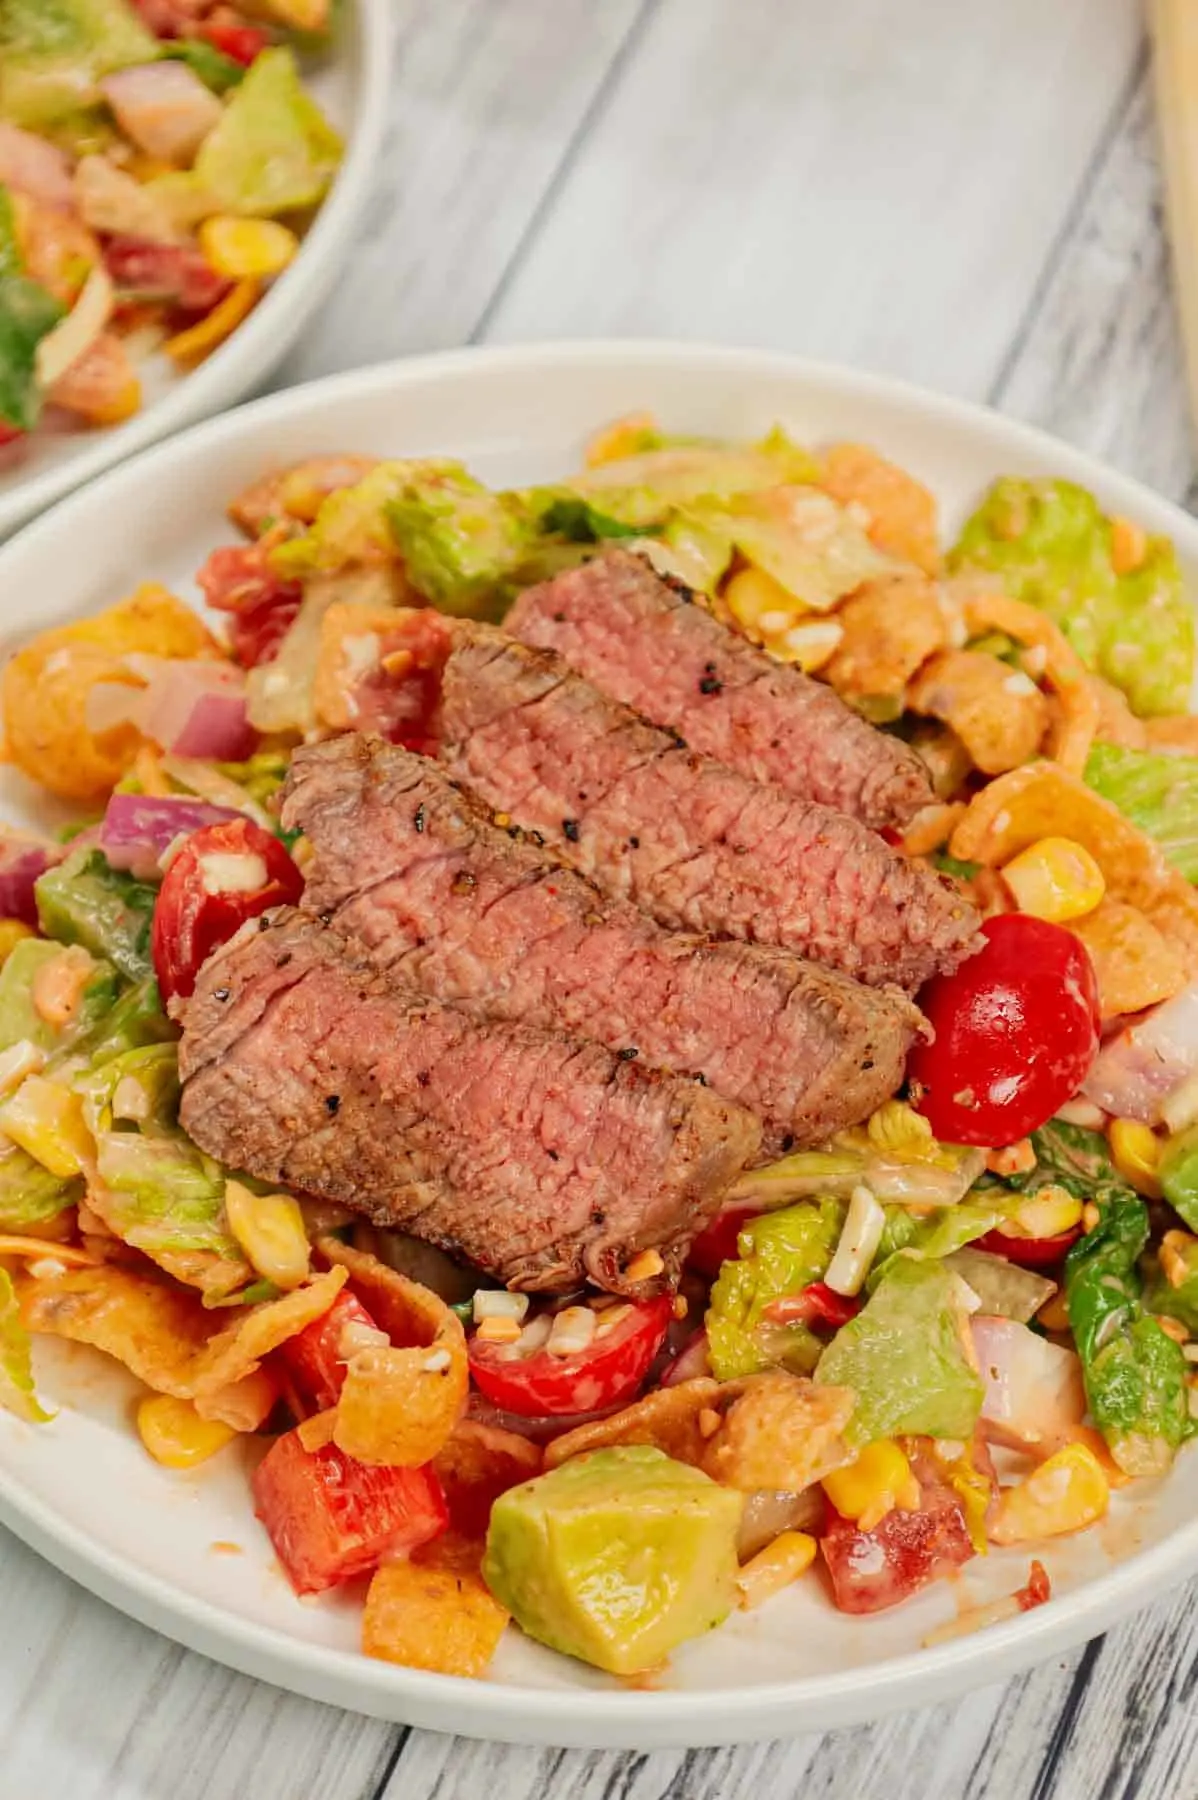 Steak Taco Salad is a delicious dinner recipe loaded with romaine lettuce, red onions, red bell peppers, green bell peppers, grape tomatoes, corn, shredded cheese, chunky salsa, ranch dressing, diced avocado, Fritos corn chips and sliced eye of round steaks.